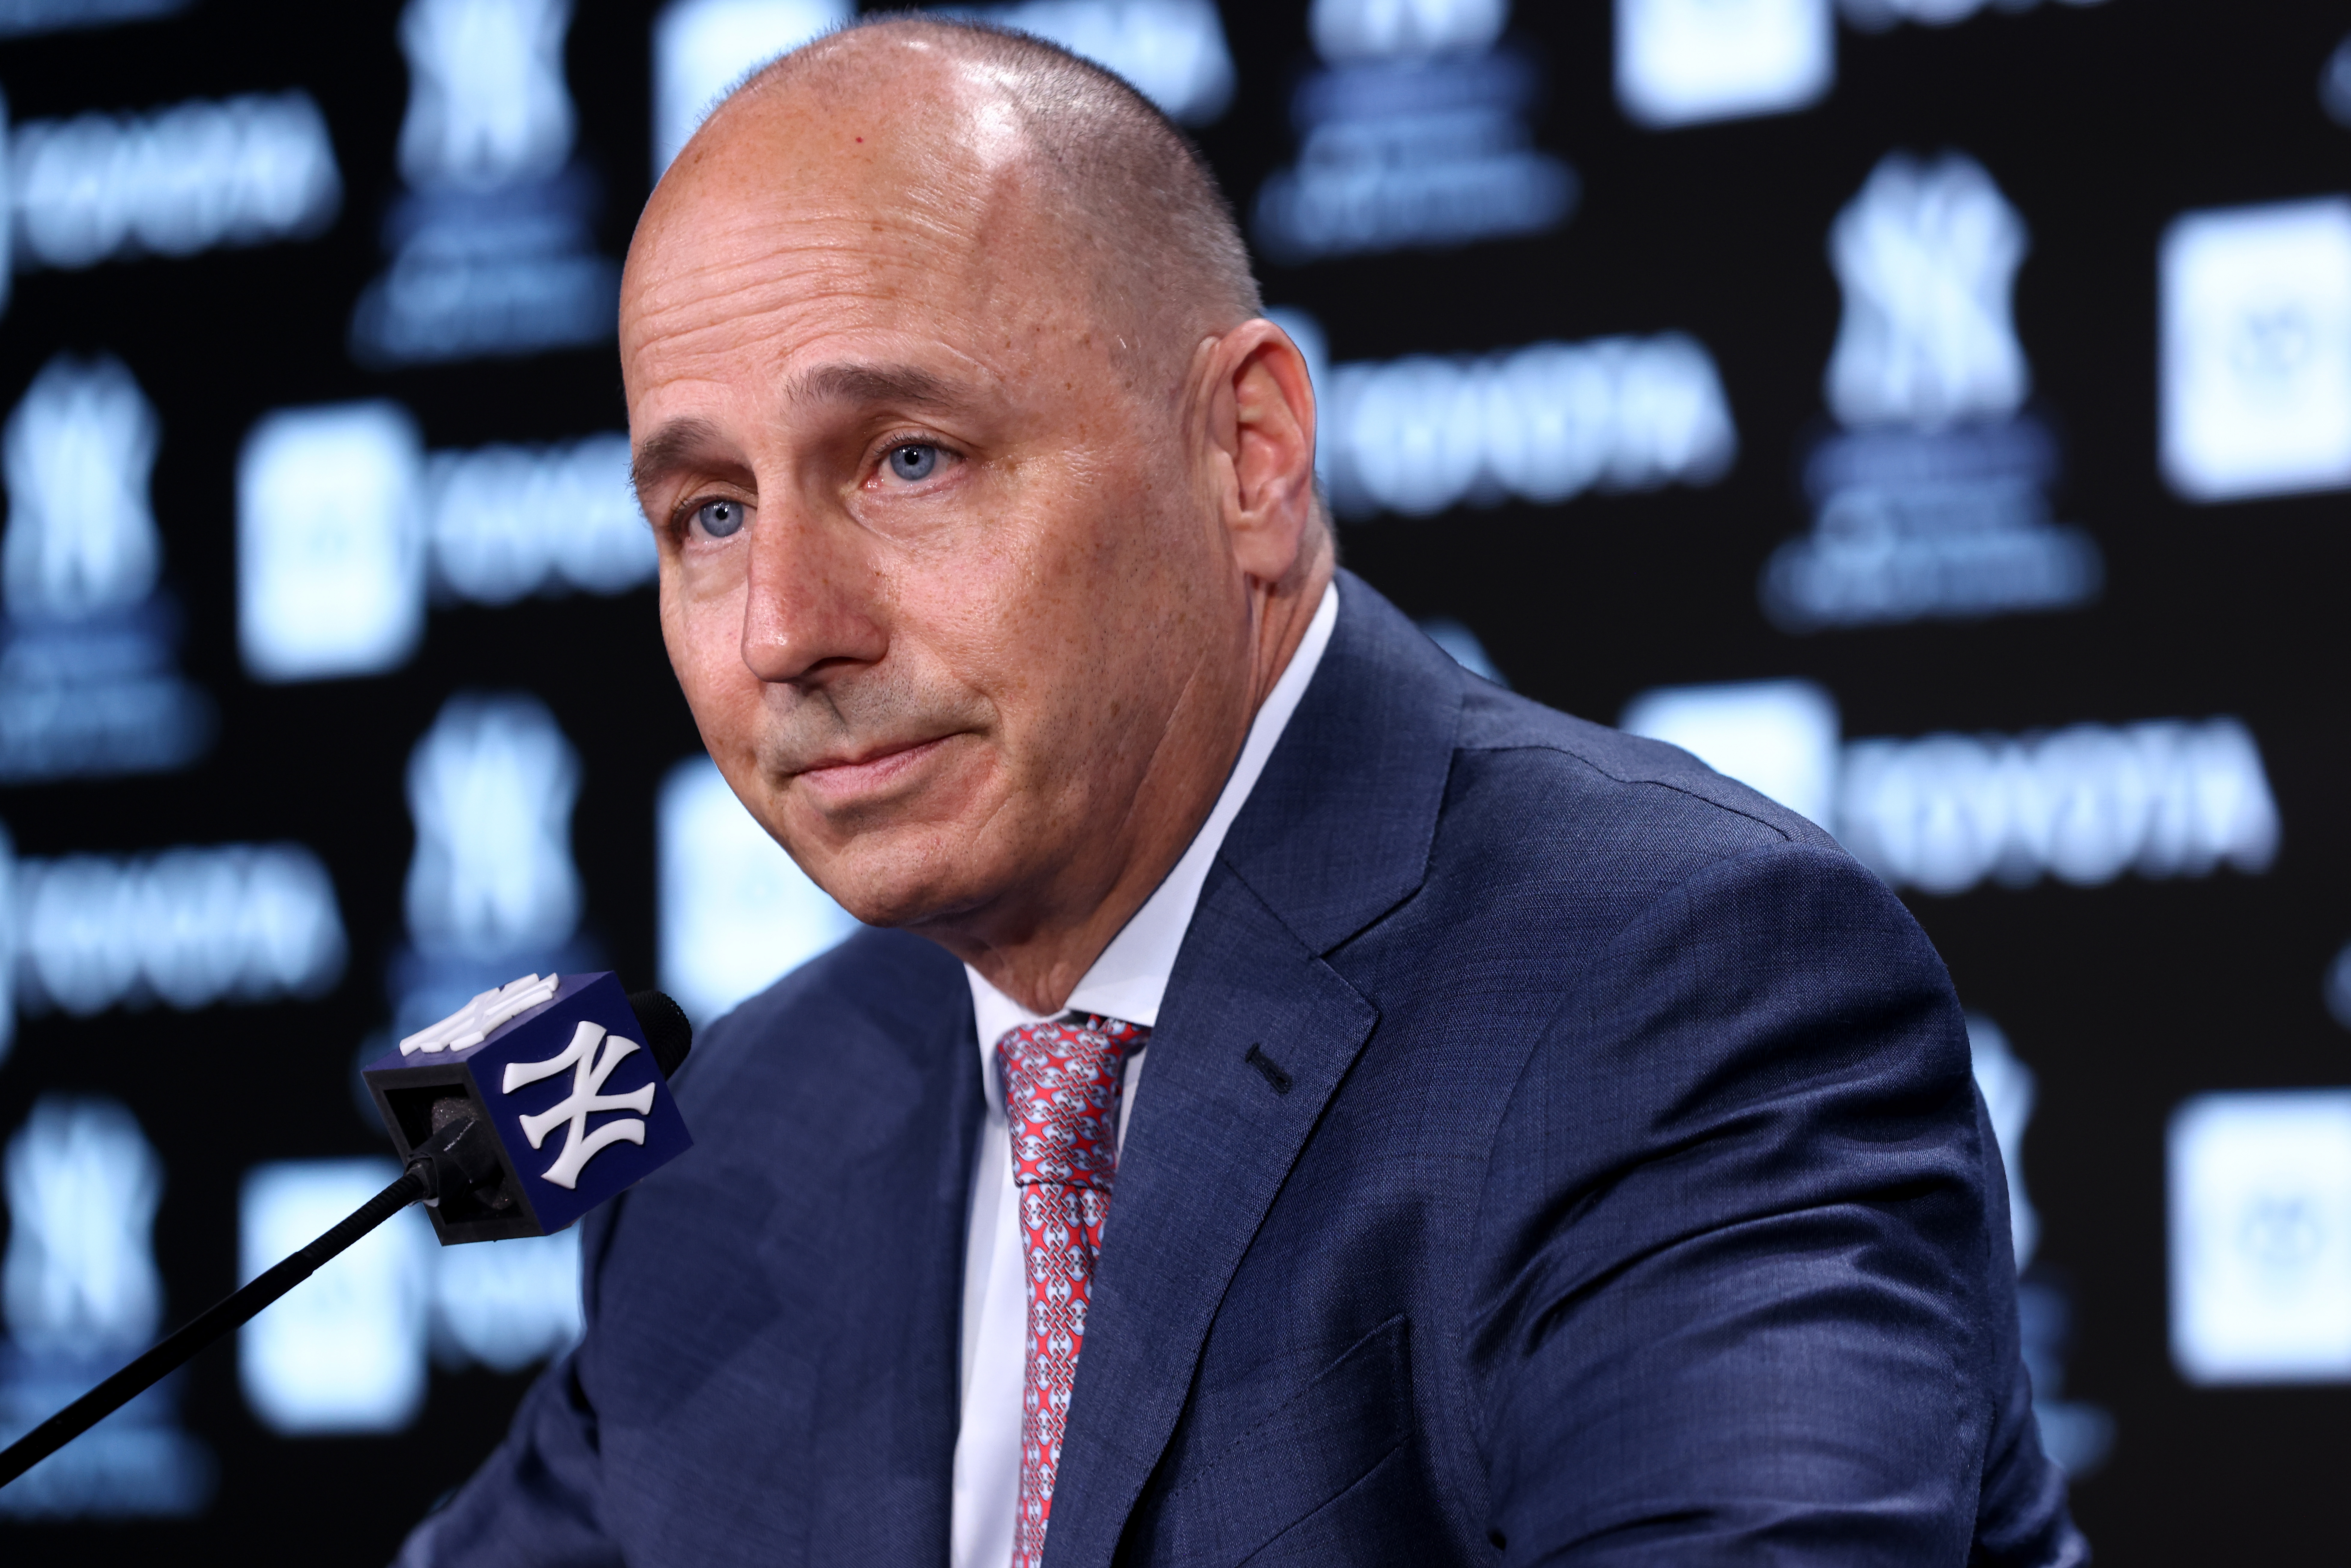 New York Yankees General Manager Brian Cashman speaks to the media prior to the start of the game against the Boston Red Sox at Yankee Stadium on April 08, 2022 in New York City.